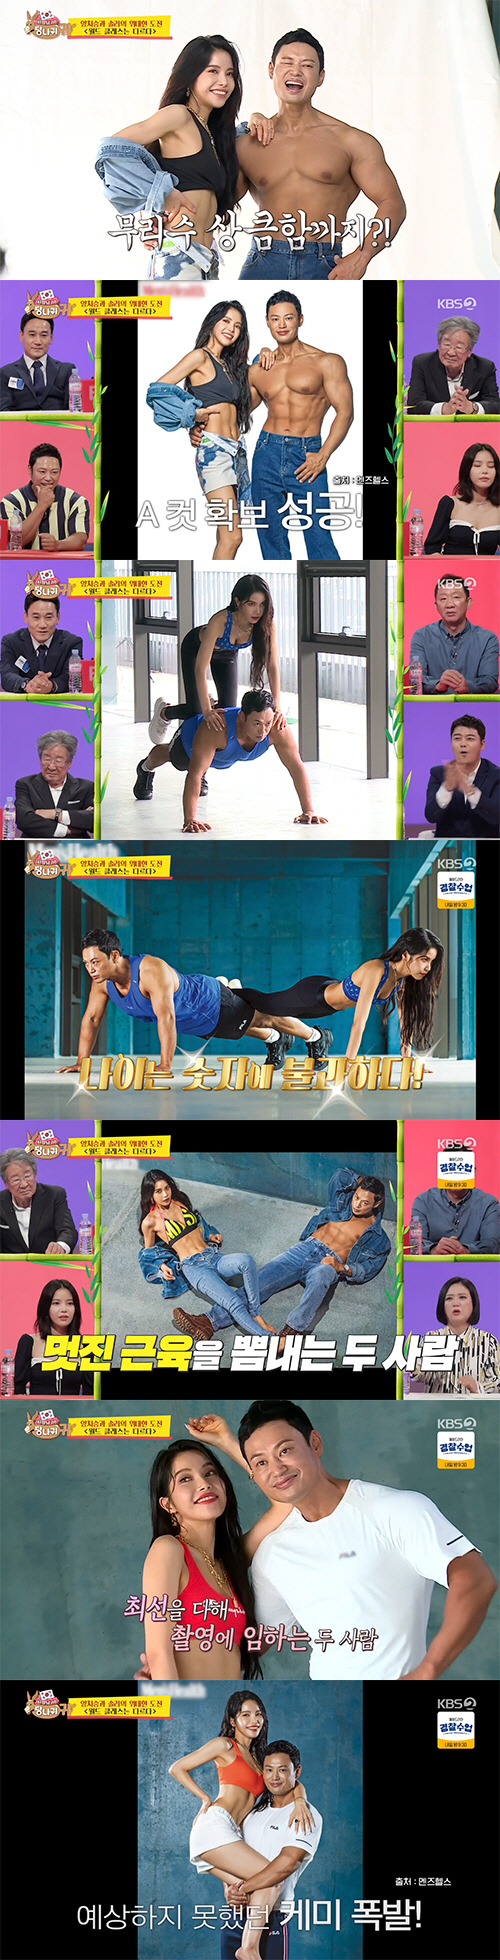 Yang Chi-seong and Sola were seen as successful in shooting magazines.On the 15th KBS 2TV entertainment Boss in the Mirror (hereinafter referred to as Donkey Ear), the shooting scene of the magazine cover Model by Sola and Yang Chi-seong, which have been trying to make the best body for the past three months, was drawn.The day finally became the day of the magazine cover shoot: Yang Chi-seong arrived at the set in a celebrity vehicle himself.Soon after, Sola arrived with a very hard look and worried everyone.The pair made themselves into a three-month diet control, and were even singular for 48 hours for the final shoot.Before shooting, Yang Chi-seong showed another full-scale exercise and tense muscles.Yang Chi-seong, who confirmed the concept and filmed it, transformed into a perfect model.Magazines One also praised Yang Chi-seong for his appearance.Finally, Yang Chi-seong put on a top suit and stood in front of the camera, and Jun Hyun-moo said, I really feel pretty.Is the abdominal muscles drawn? Yang Chi-seong said, I thought it was the last time I took a picture and I had a good time. Special MC Choi Bum-am showed concern that I would have really done it.Finally, the double cut shooting of Sola and Yang Chi-seong began.At this time, Solas abdominal muscles were revealed, and Yang Chi-seong as well as magazines One were surprised that abdominal muscles are not a joke.Sola said, The best thing I was worried about was the abdominal muscles. I worked hard, but I was worried about what if I did not come out, but I was glad to be out.Unlike Sola, who started shooting but laughed brightly, Yang Chi-seong, who seemed to have no power, laughed.Im feeling sick, but Im not feeling my face, Hur Jae said, plunging.Yang Chi-seong also showed the idea of ​​putting Sola on his back and pushing up and actively shooting.Sola recalled the time, saying, It was too hot, in a situation where I had to shoot on a stone in hot weather.Jun Hyun-moo laughed, saying, Is not it a squid squid in that weather?When Solas filming was over, Yang Chi-seong handed Sola a one-piece bottled water and said, Thank you.Especially, I had a one-shot at once after two days of party.In the studio, Sola laughed, saying, I want to go back to that body, now its watermelon.After finishing filming, Sola said, Lets try really hard.I think I worked hard enough not to regret it, Yang Chi-seong and Sola said, We talked about something, lets go to binge eating. Yang Chi-seong said, I thought Sola was a professional; I was stimulated by the way she came out every day, and I worked harder thanks to Mr. Sola.Sola said: I was born and never thought of making this body until now, thanking the two directors and the production staff for setting up this position.I was also impressed when the crew said that they had suffered. Sola said, I started without knowing it was so hard, I thought how many times I would hit it, but I really gritted my teeth.On the same day, the members of Juju Sangmu FC Hanwoo, who was in the process of reviving the local economy, showed Lee Yong and went to dinner.Han Ki-bum started making beef kimchi stew, Jeong Ho-young, Sangju Sangmu FC dried persimmon Lee Yong.Especially, the youngest Han Ki-bum laughed when he showed a camera setting for shooting.Han Ki-bum, Hur Jae, and Hyun Joo-yup Jeong Ho-young were laughing at each other as they prepared meals and insisted that the way of photography was right.In the end, the members of Juyup TV succeeded in promoting the castle while eating a perfect meal with the castle Hanwoo.On the same day, Hur Jae took on a solo MC, and as an assistant MC starter, he was invited to the MC special prize from Jeong Ho-young, Song Hoon Chef to Hajini and Subingsu.